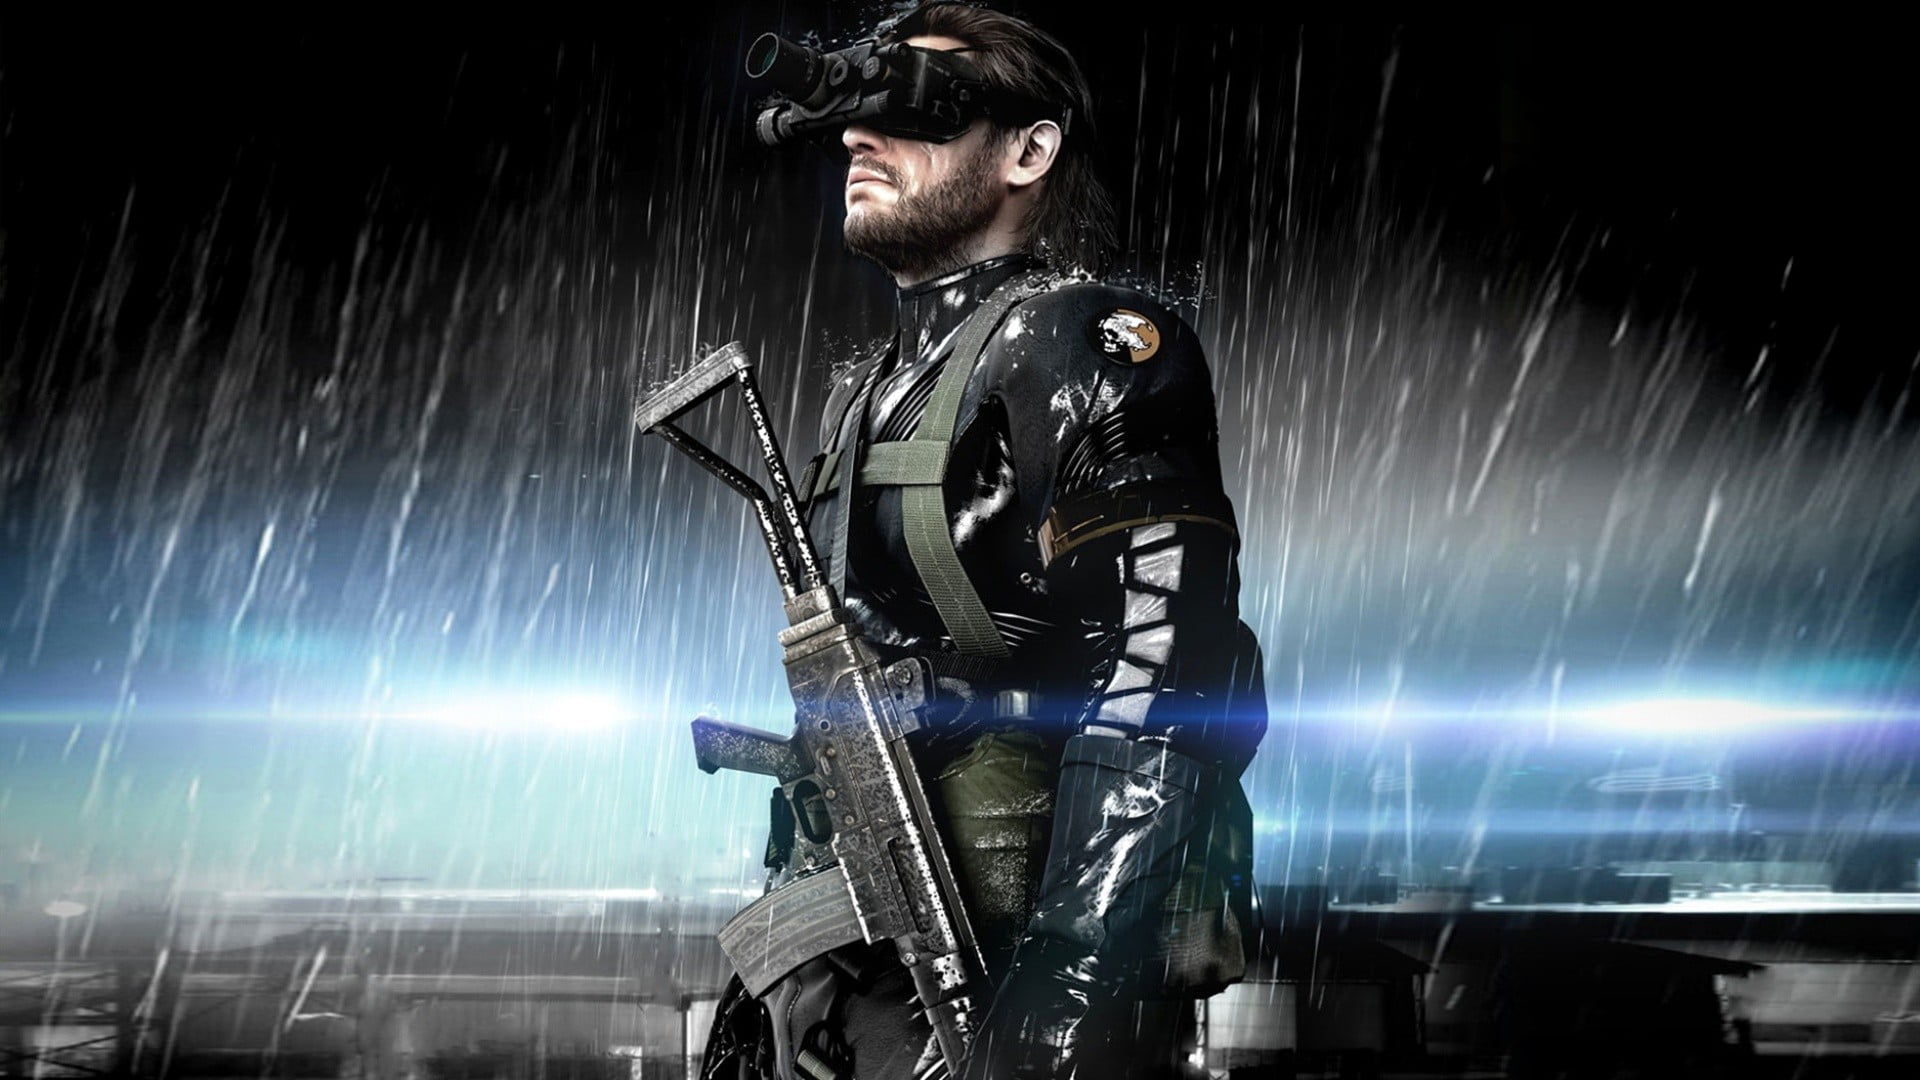 armored man with scope and rifle graphic wallpaper, video games